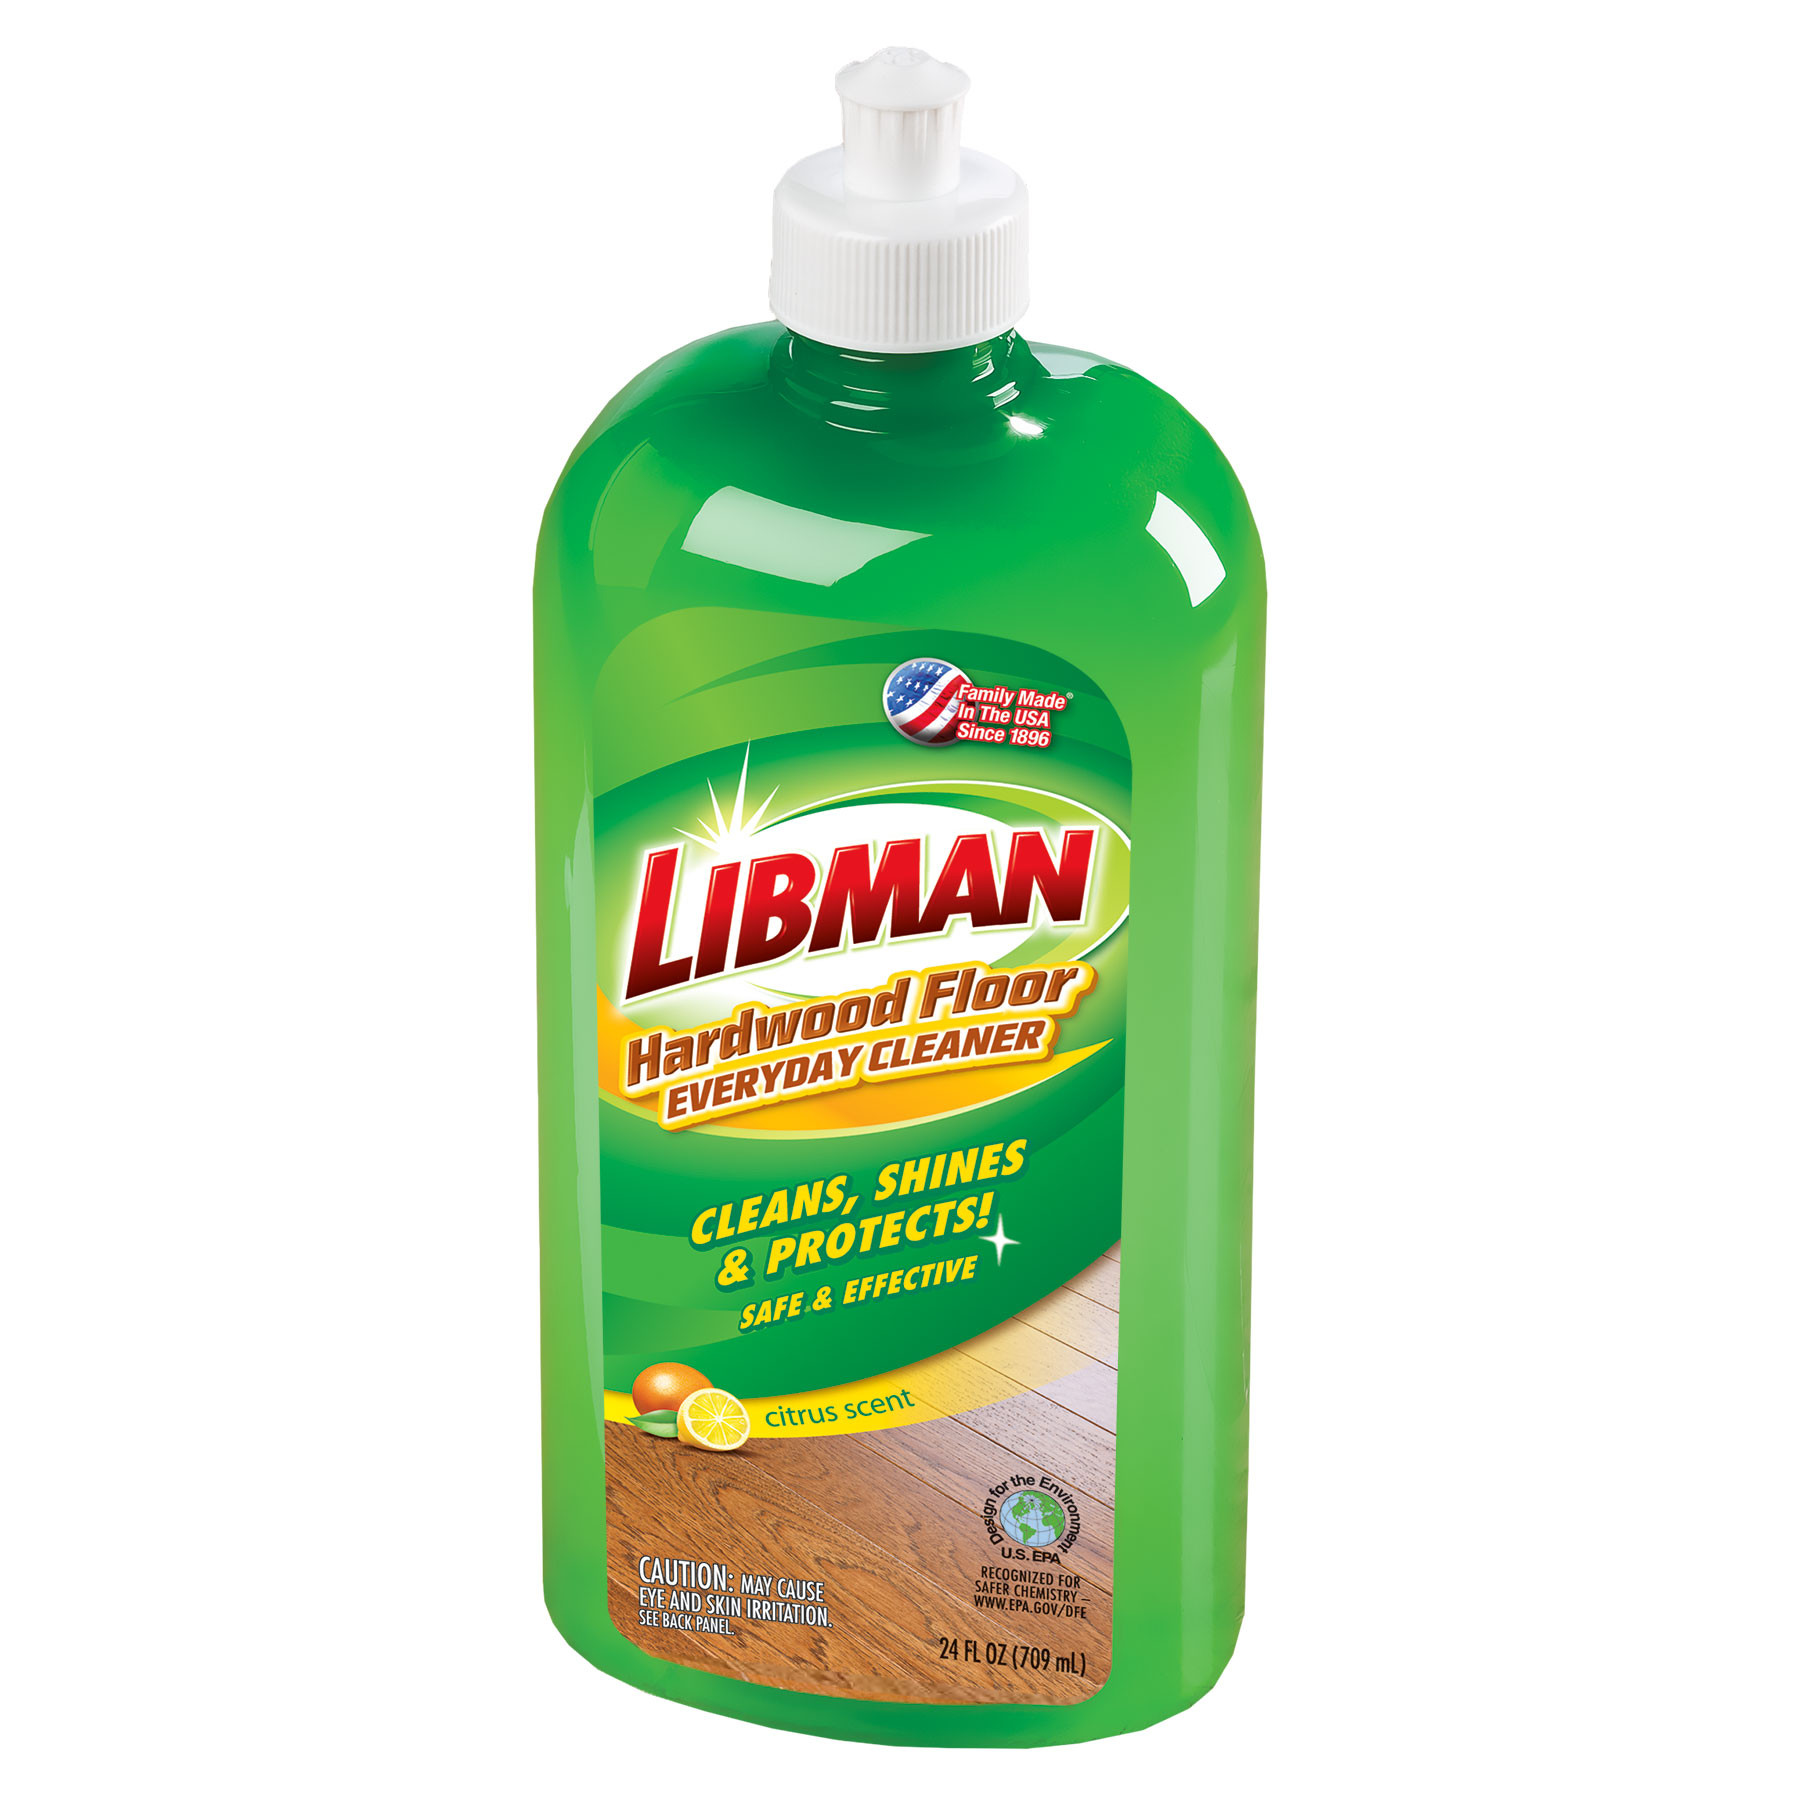 10 attractive Bona Hardwood Floor Care System Reviews 2024 free download bona hardwood floor care system reviews of libman hardwood floor cleaning liquid food grocery peel and stick for libman hardwood floor cleaning liquid food grocery hardwood floor cleaning pr